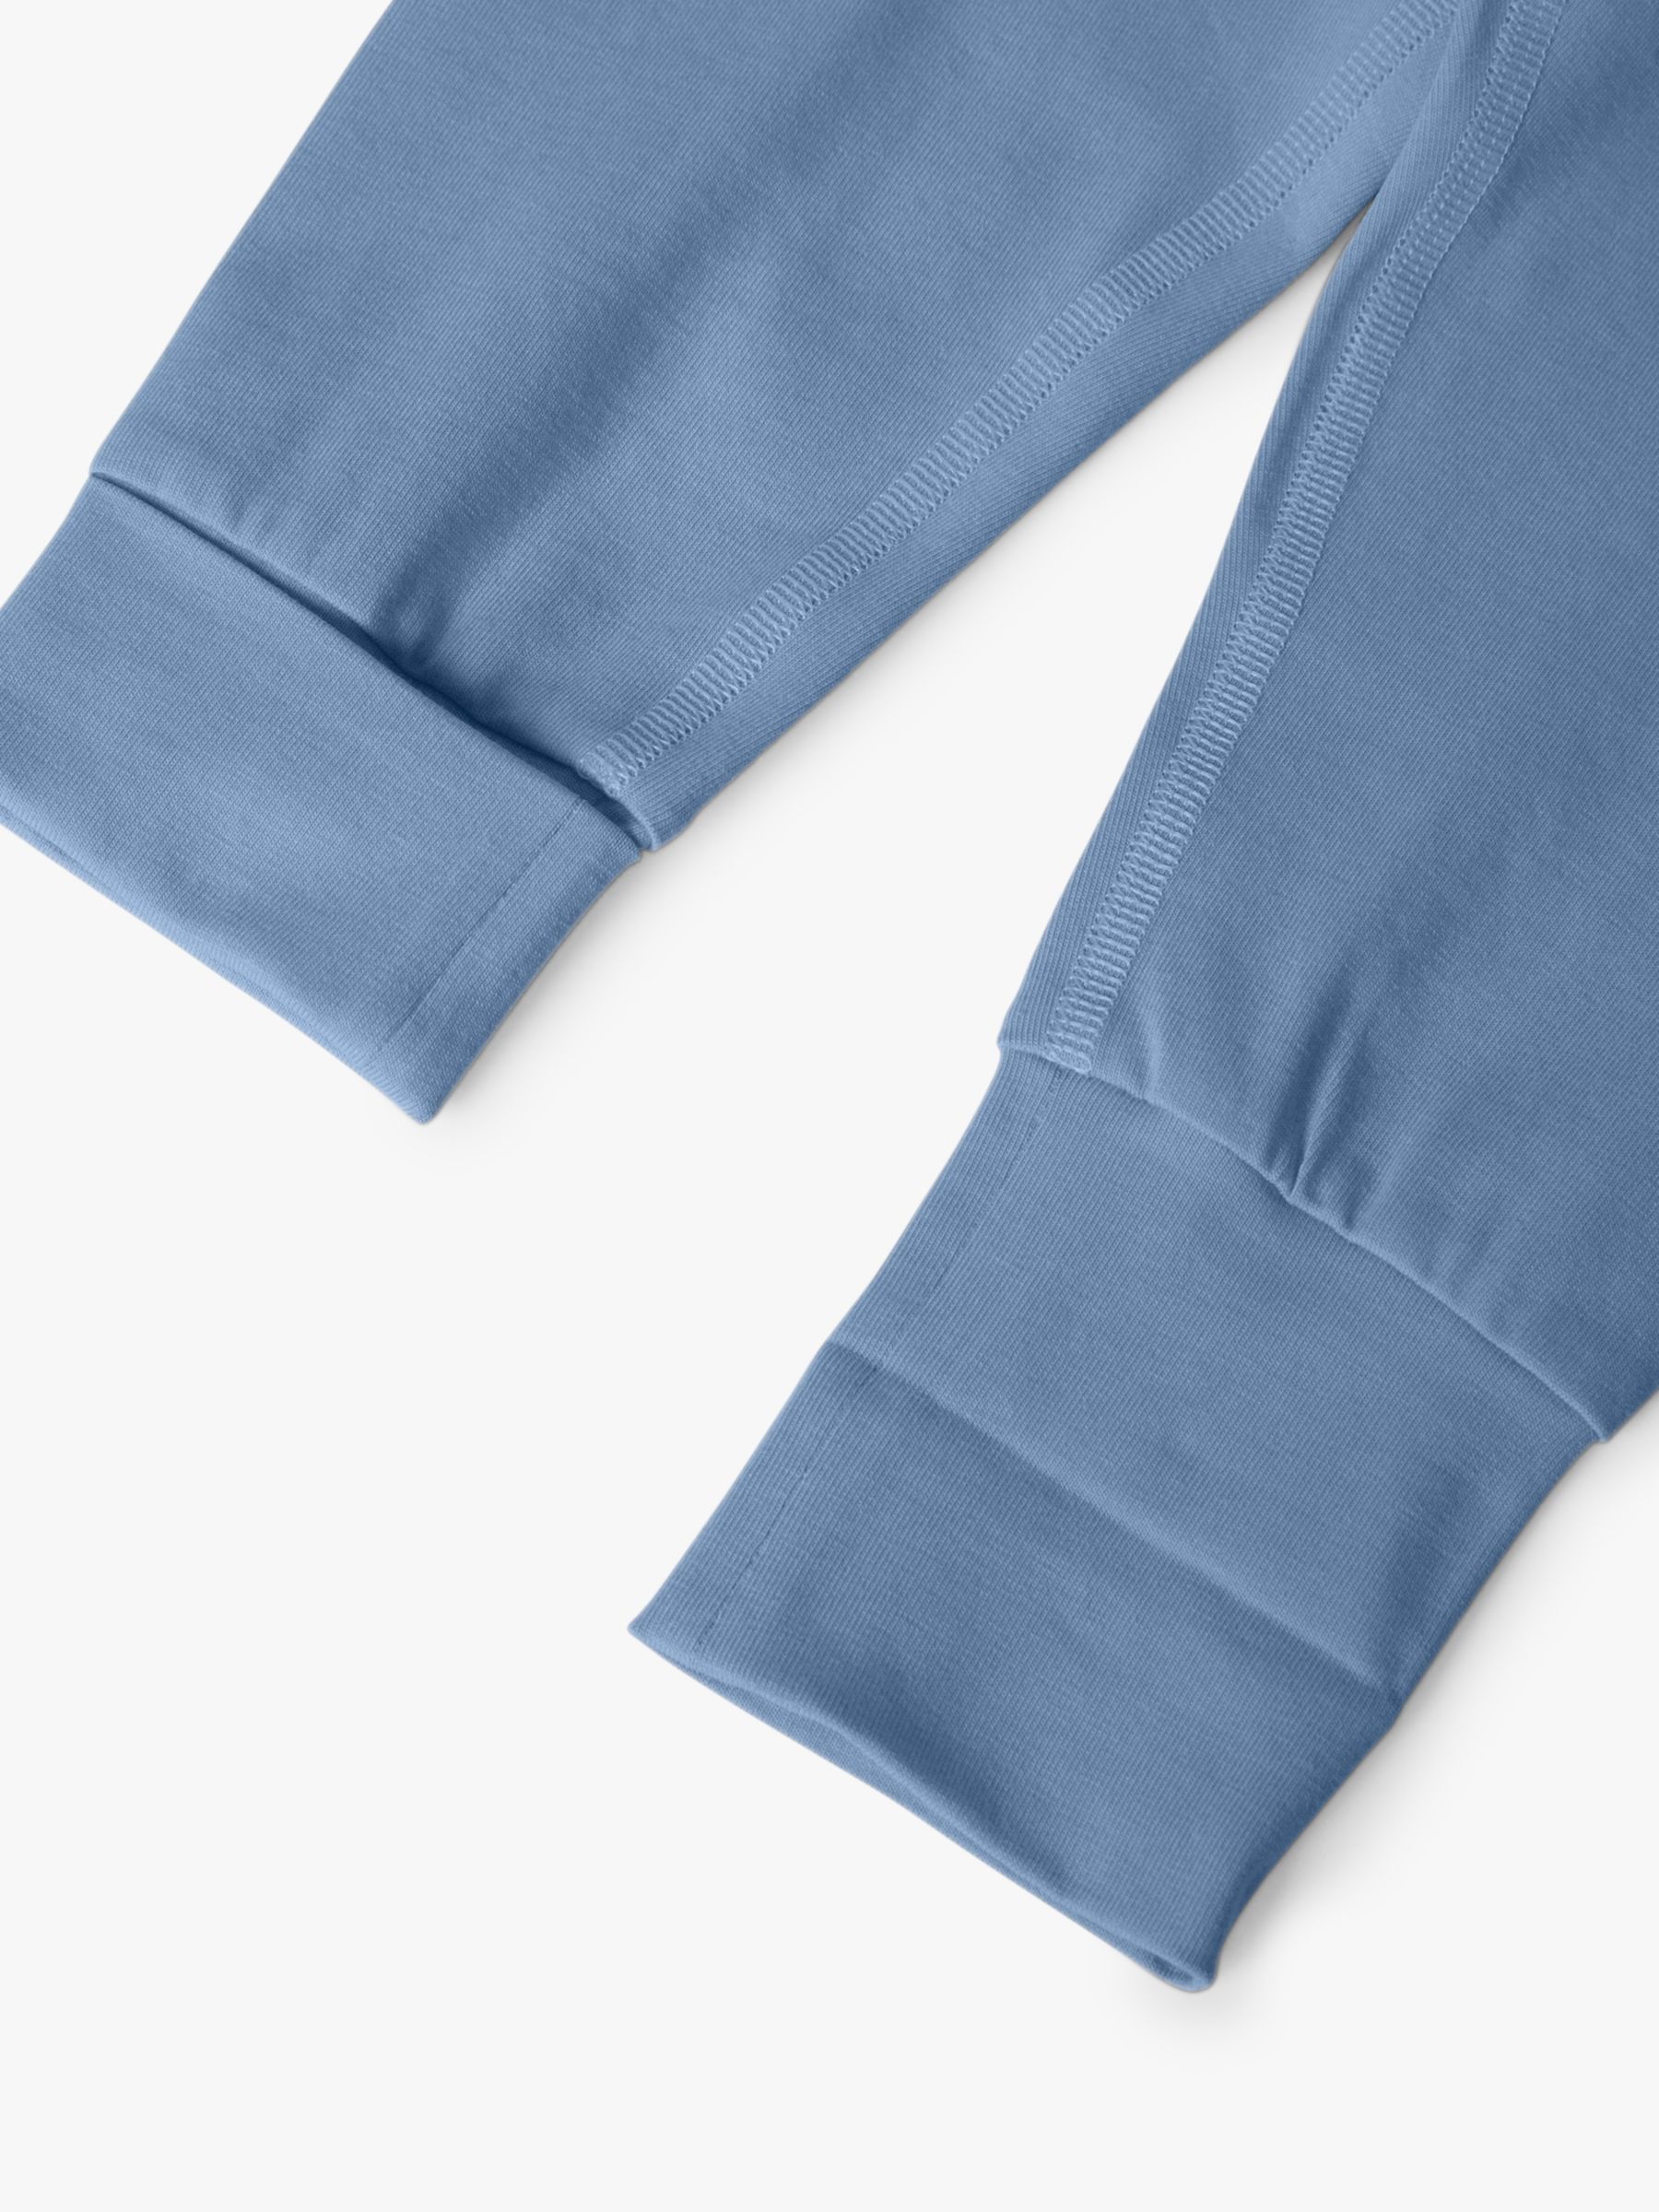 Buy Polarn O. Pyret Baby GOTS Organic Cotton Blend Trousers Online at johnlewis.com